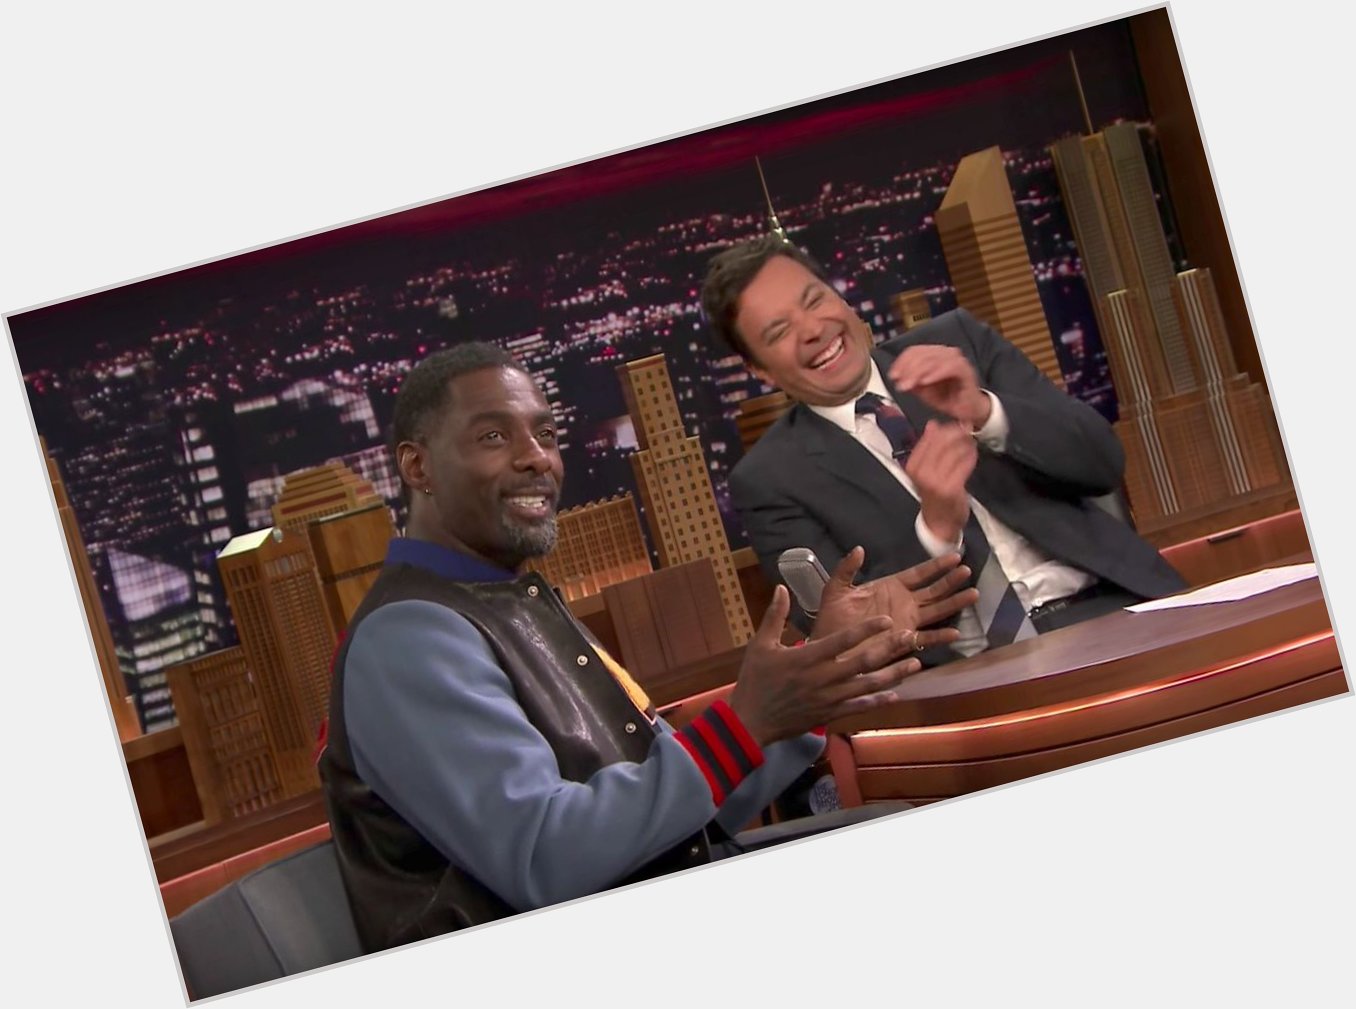 Happy Birthday, We revisit his hilarious sit-down with Jimmy Fallon:  